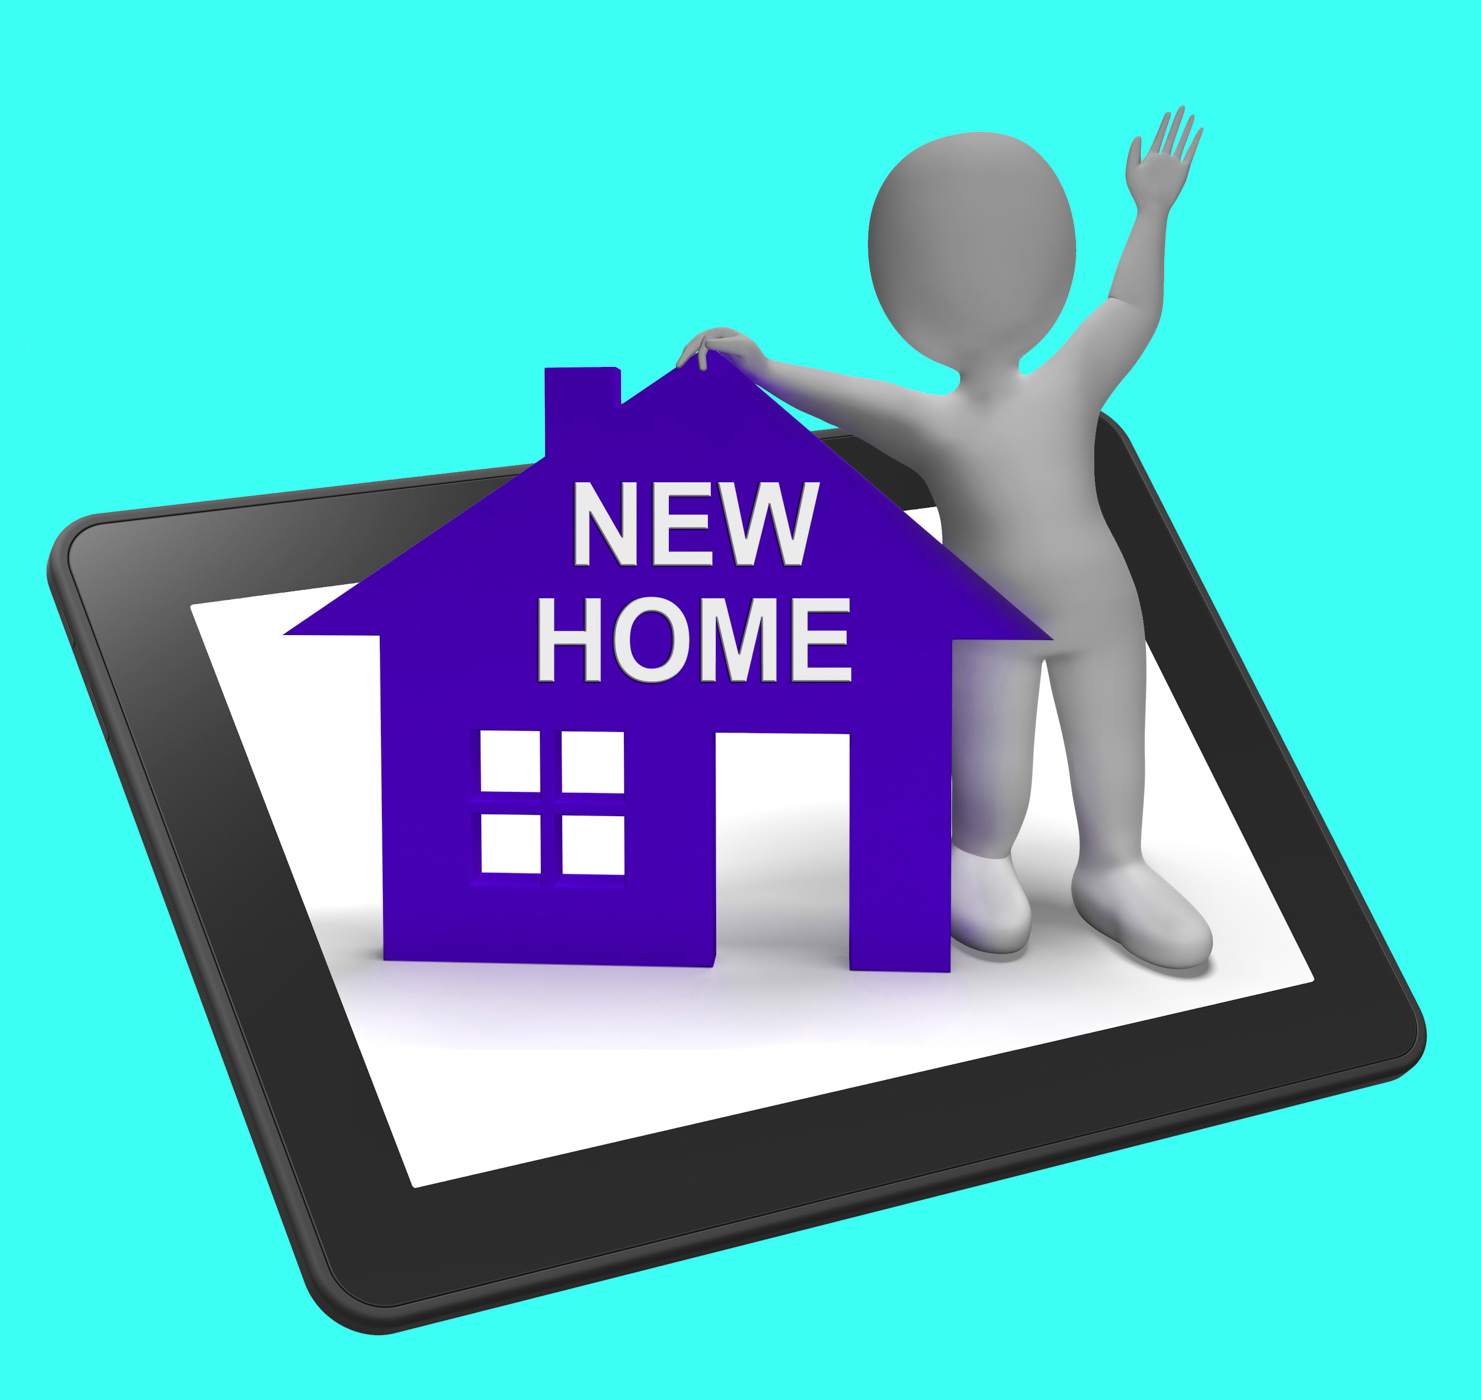 New home house tablet shows buying property and moving in photo